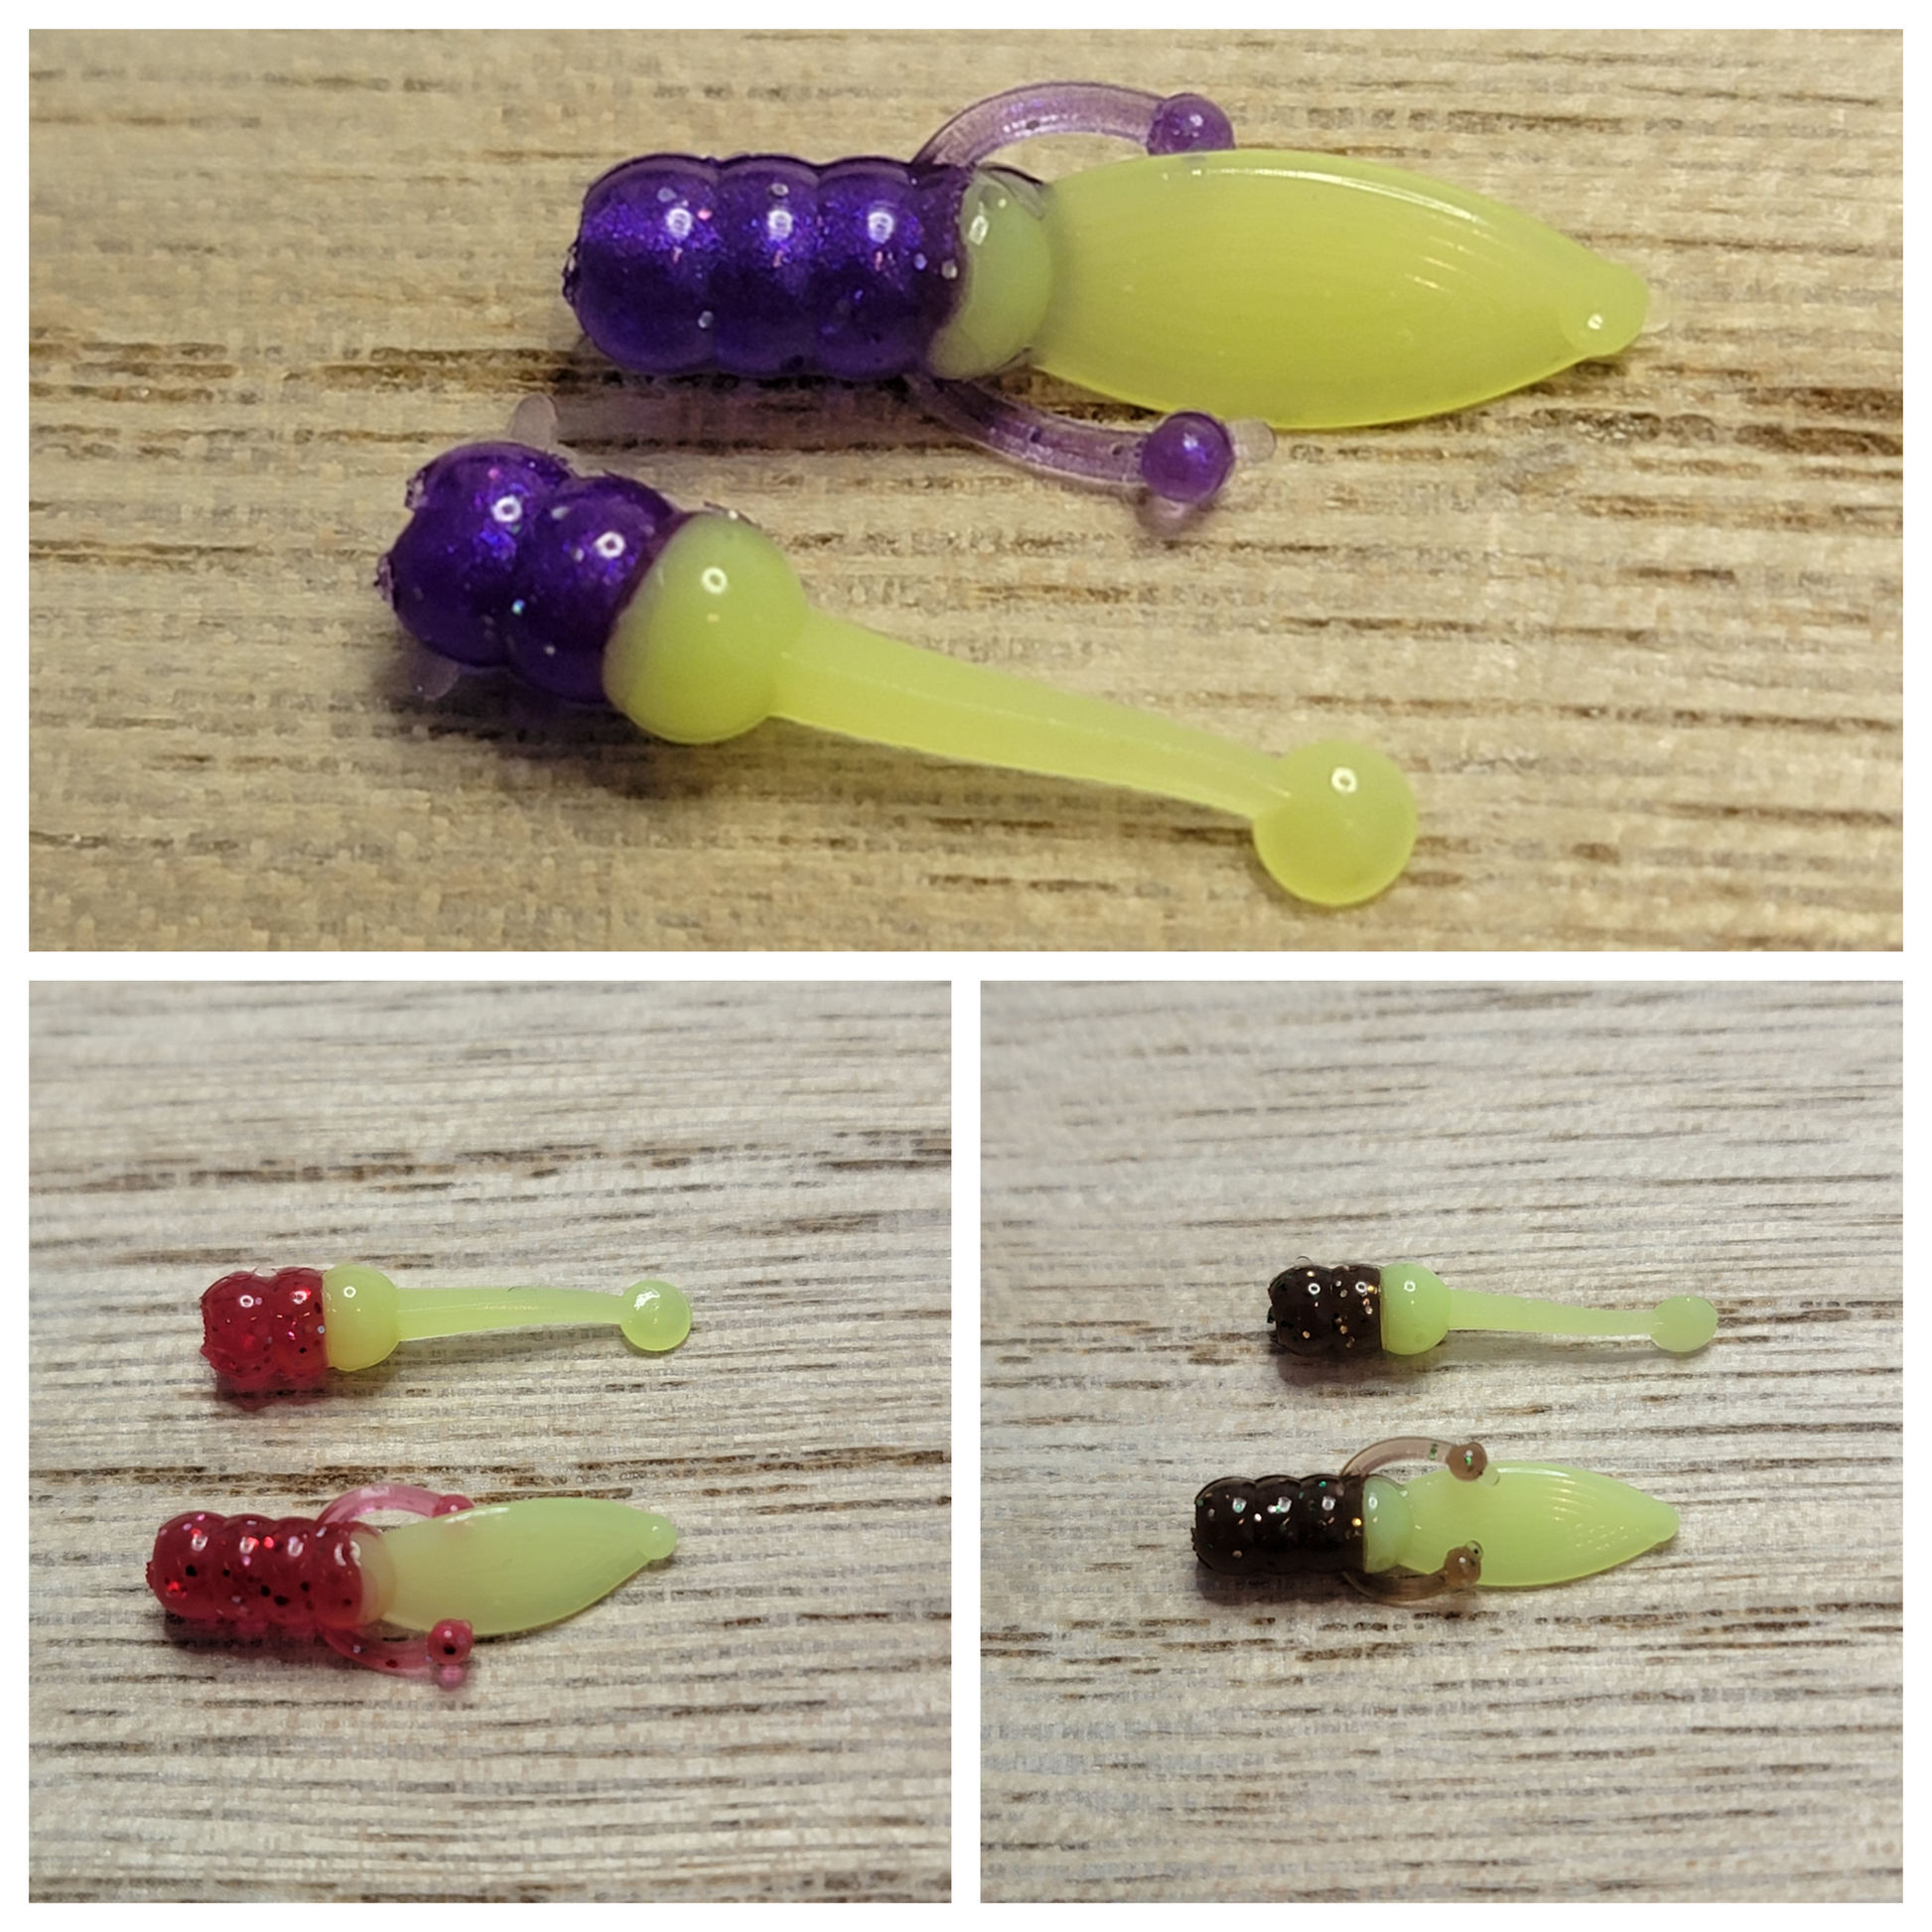 Purple Ice Glow Two Toned Panfish Bait 10 Pack .75-2